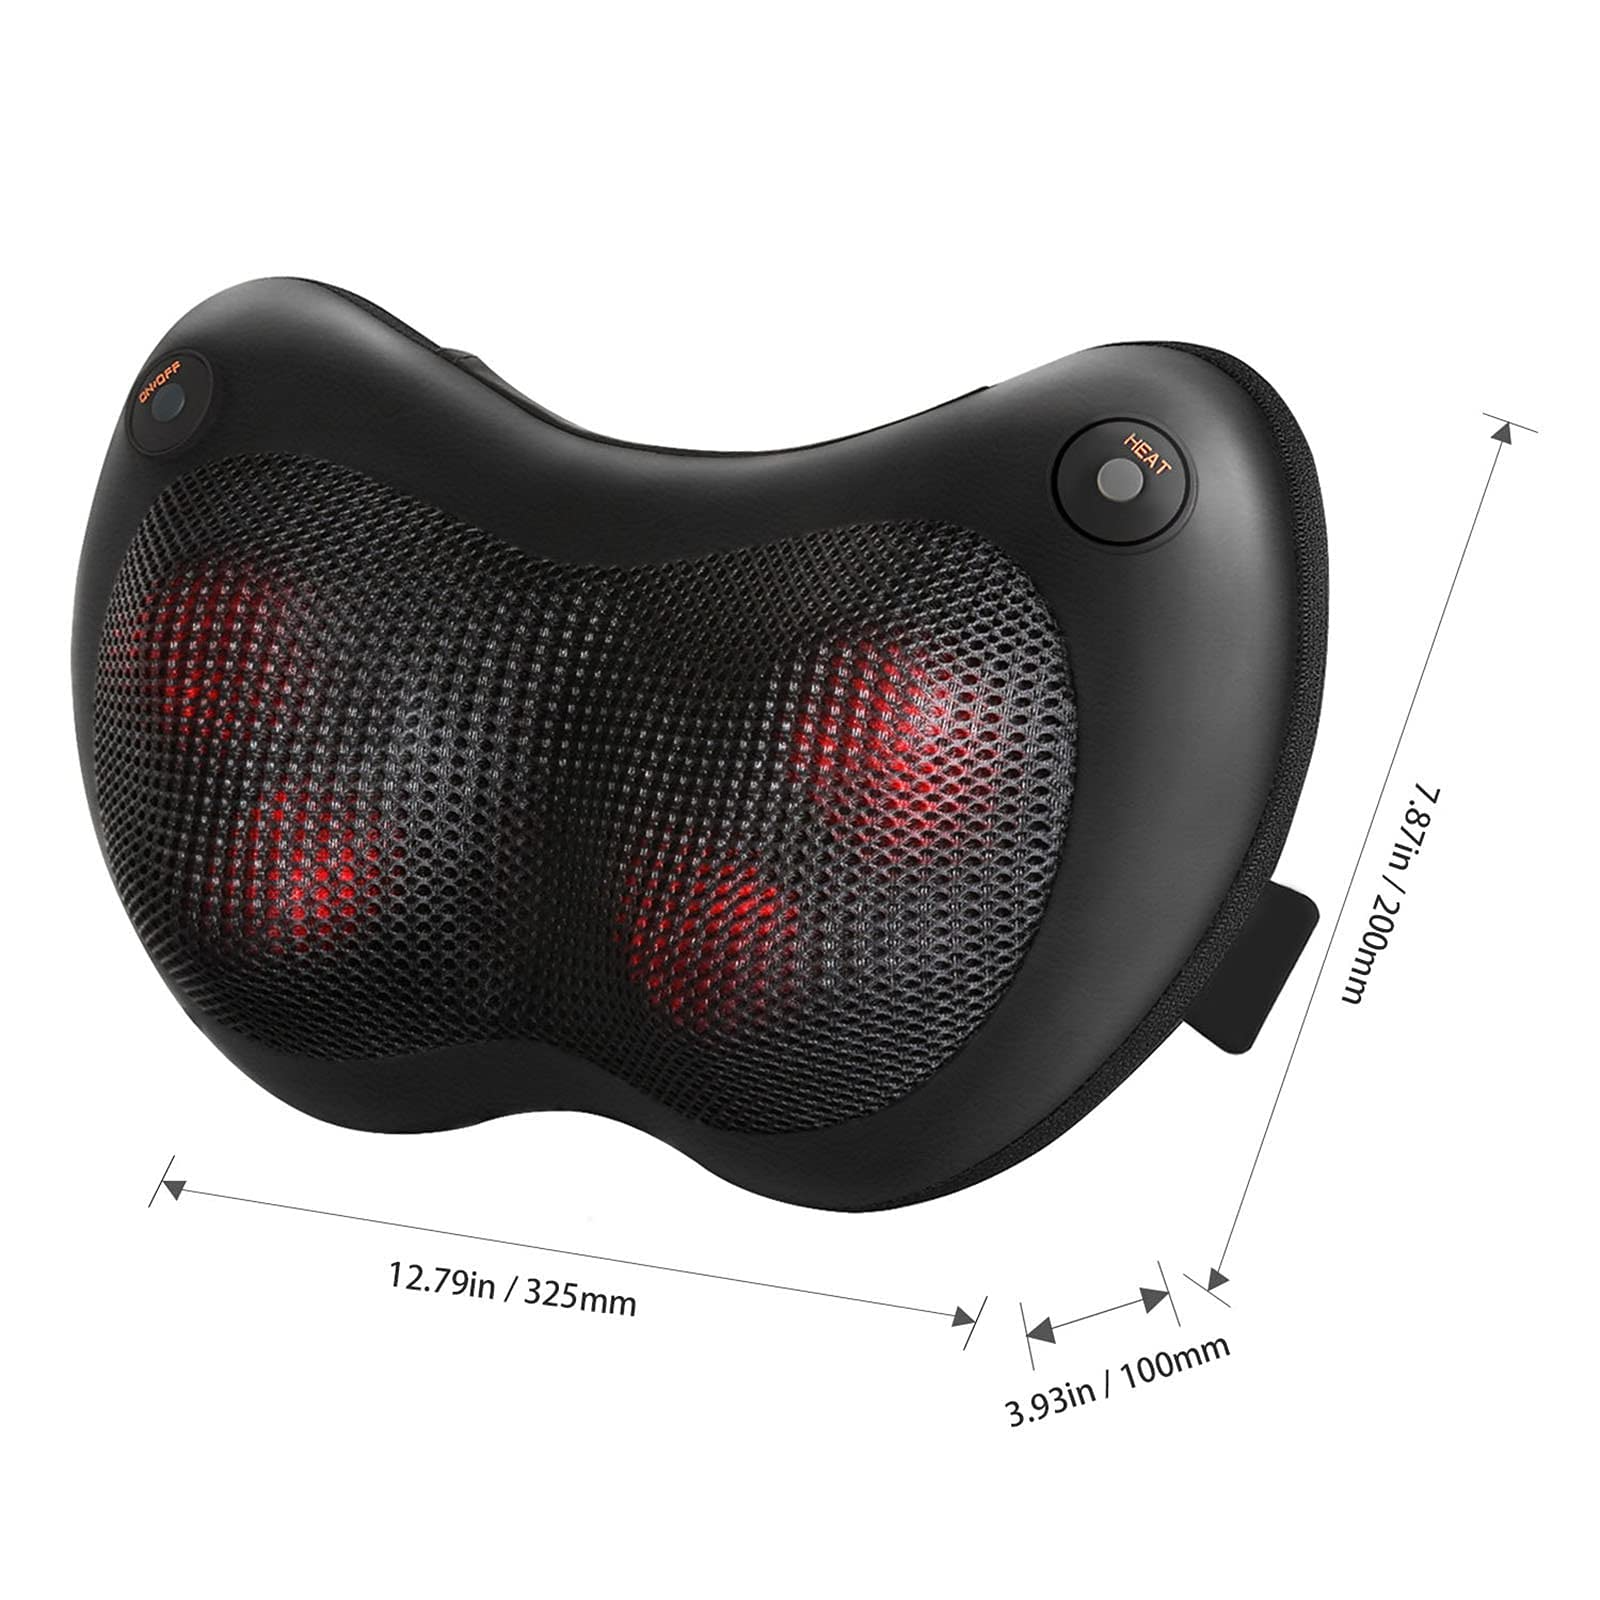 Load image into Gallery viewer, Naipo Electric Back Massage Pillow Shiatsu Neck and Shoulder Massager with Soothing Heat, Deep Kneading Massager for Full Body Muscle Relax, Gift
